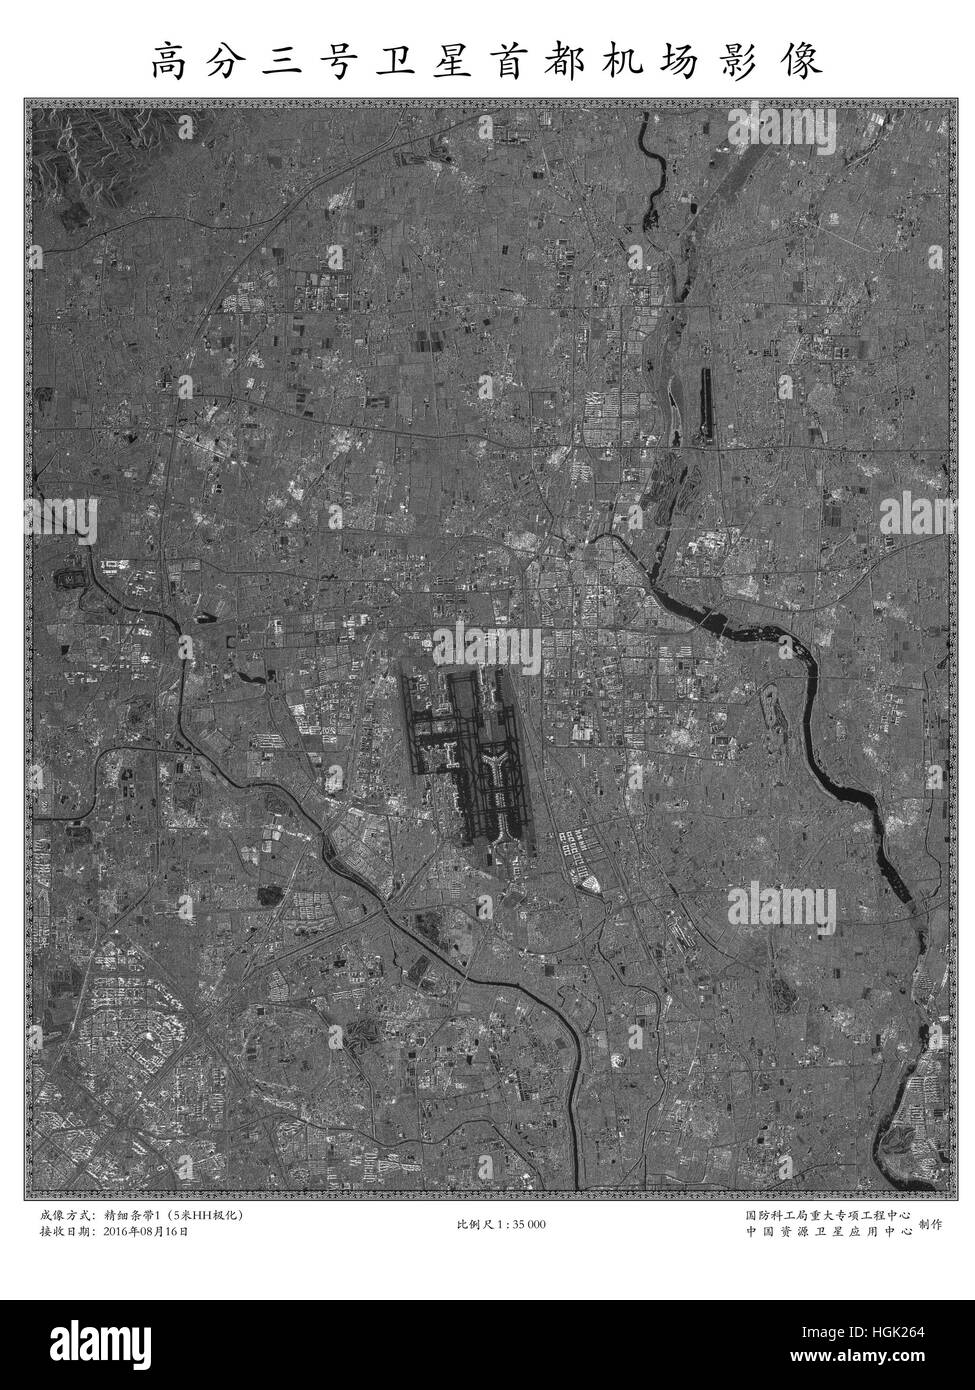 (170123) -- BEIJING, Jan. 23, 2017 (Xinhua) -- Released photo shows the image of Beijing Capital International Airport in Beijing, capital of China, which is received from China's first high-resolution synthetic Aperture Radar (SAR) satellite on Aug. 16, 2016.  China's first high-resolution Synthetic Aperture Radar (SAR) satellite has passed all its in-orbit tests and is now operational, according to the State Administration of Science, Technology and Industry for National Defense on Monday. The Gaofen-3 satellite, which is accurate to one meter in distance, was launched in August 2016. (Xinhu Stock Photo